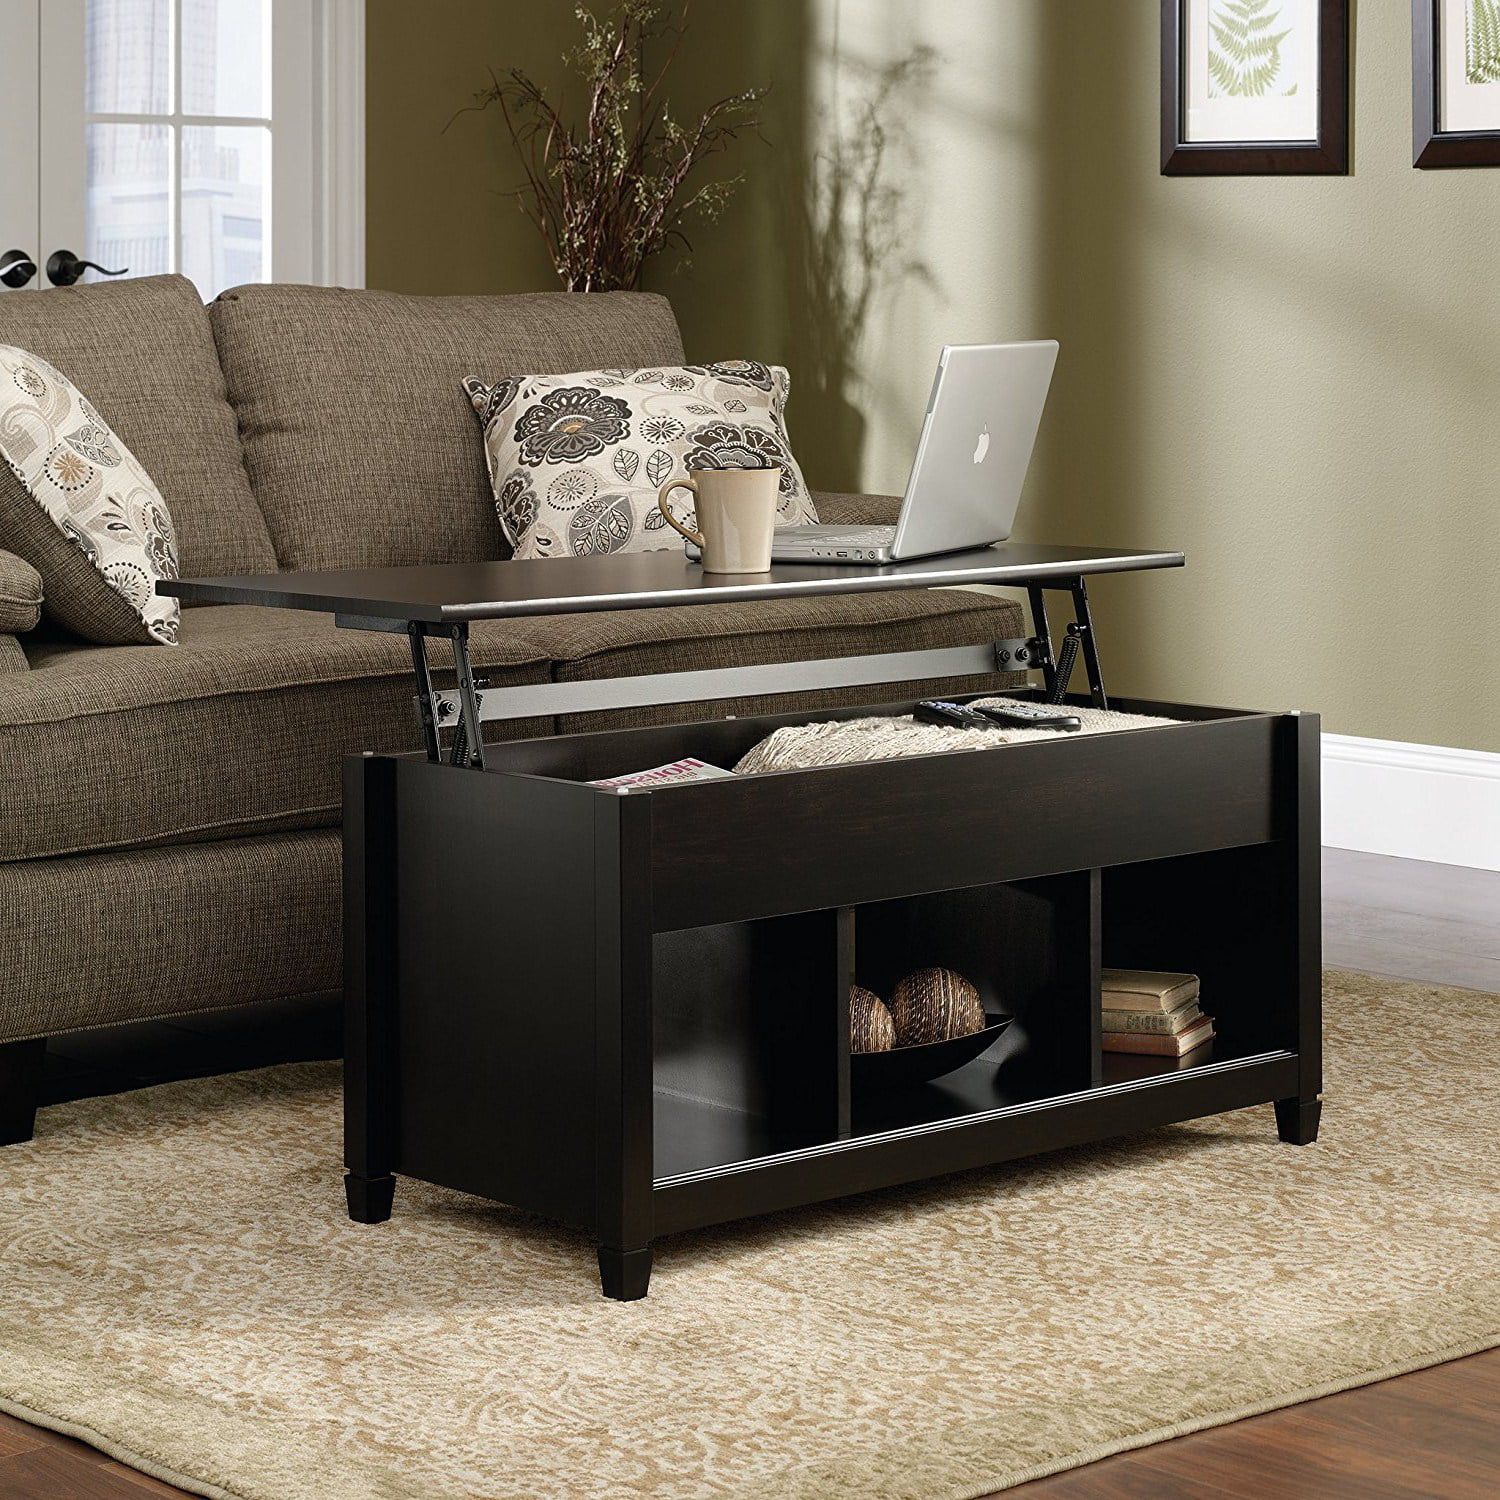 Zimtown Lift Up Top Coffee Table With Hidden Compartment End Rectangle Inside Coffee Tables With Storage (View 11 of 15)